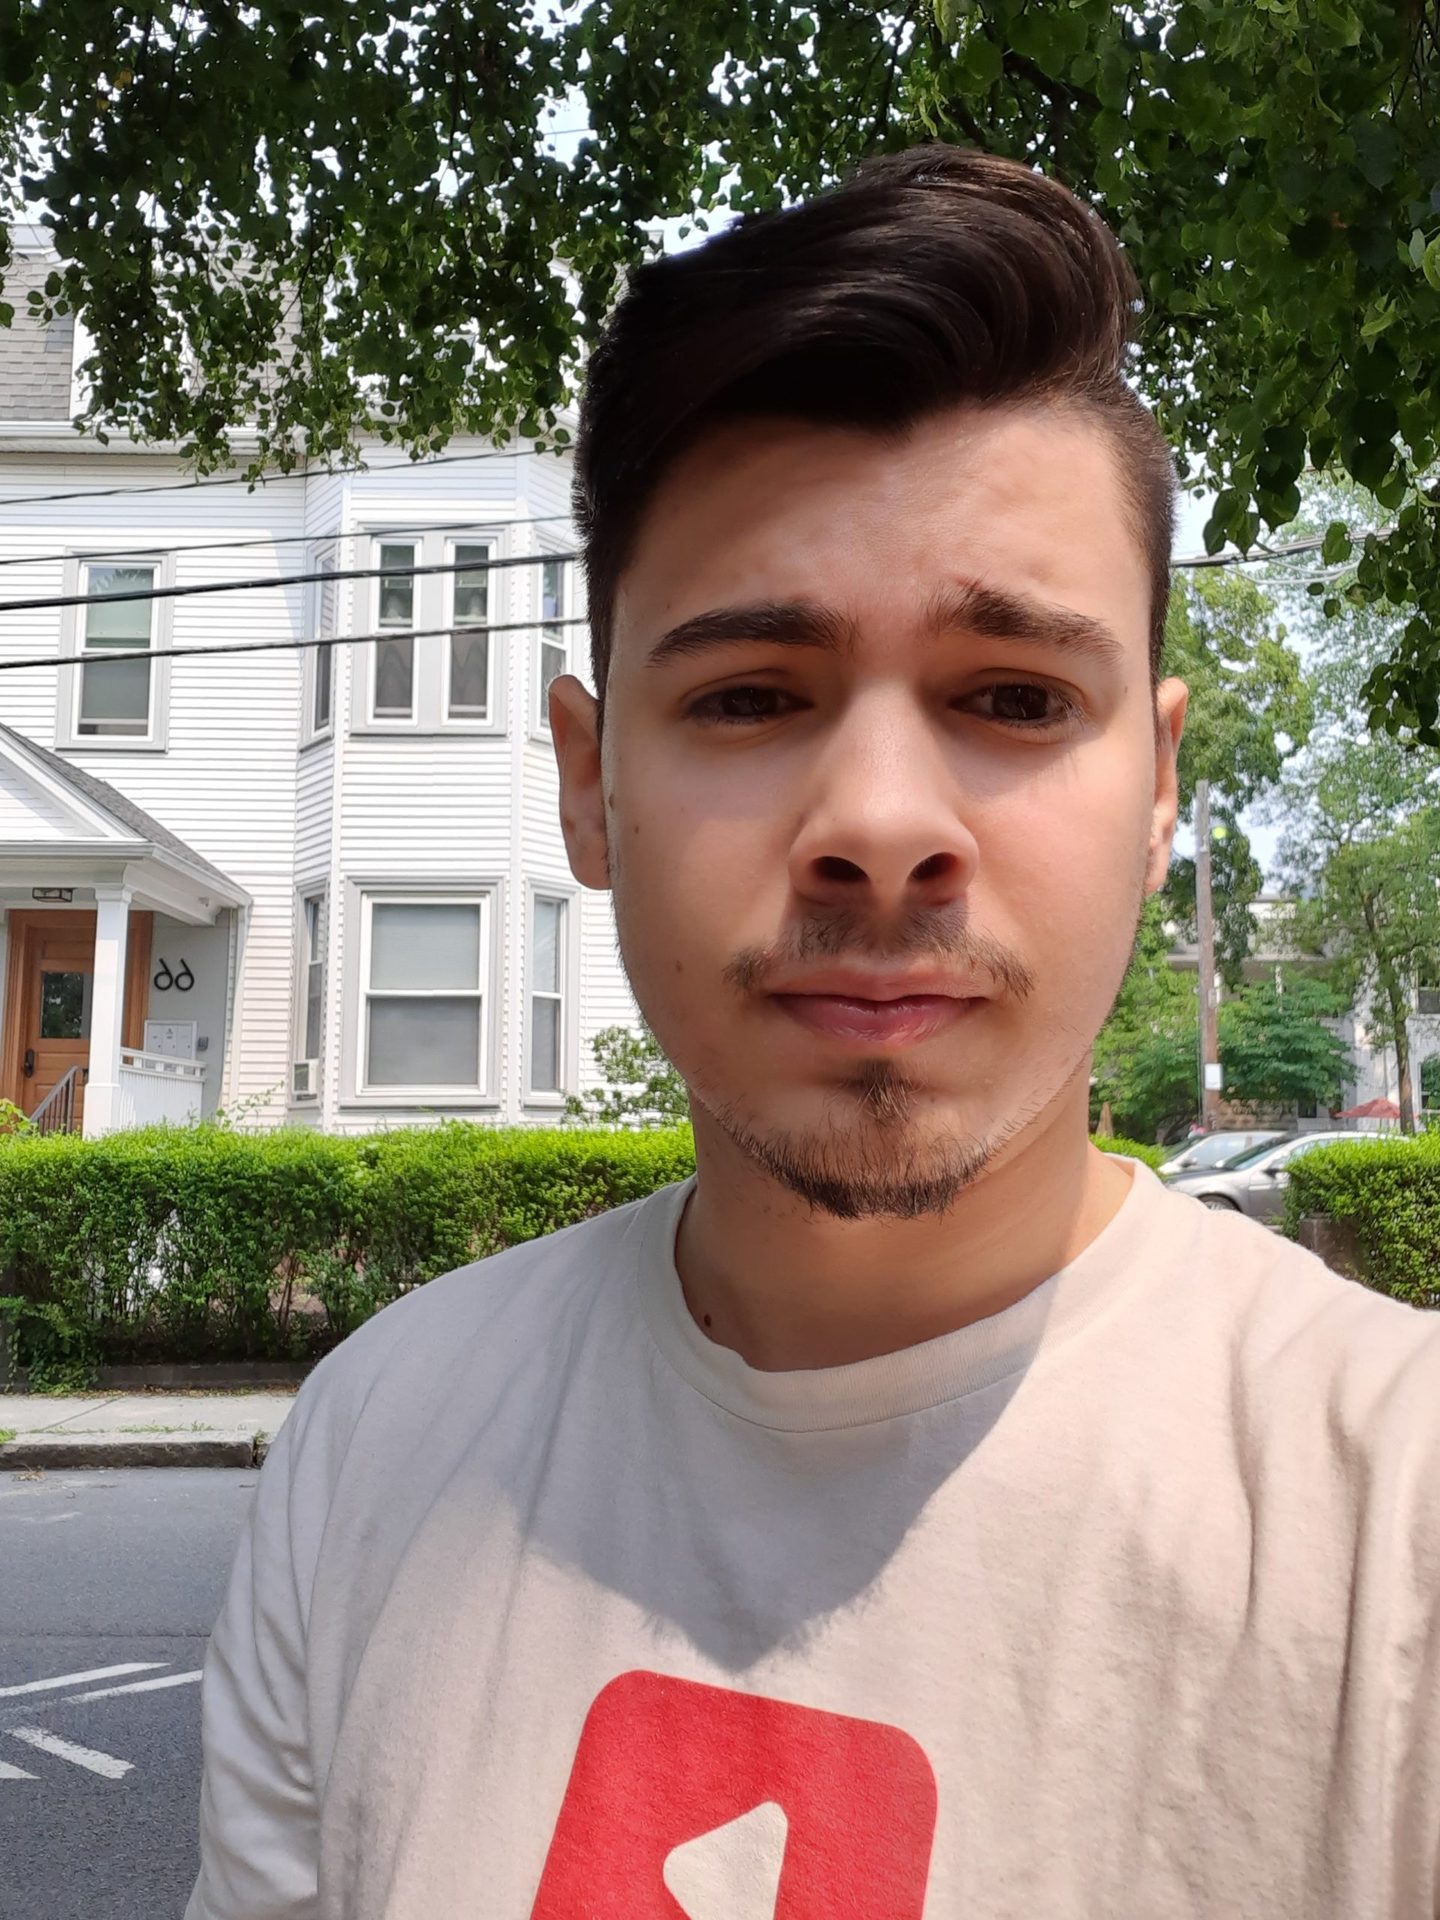 Samsung Galaxy XCover Pro Camera Samples selfie of a man with dark hair and a beard, wearing a light coloured t-shirt, with a white house behind him.